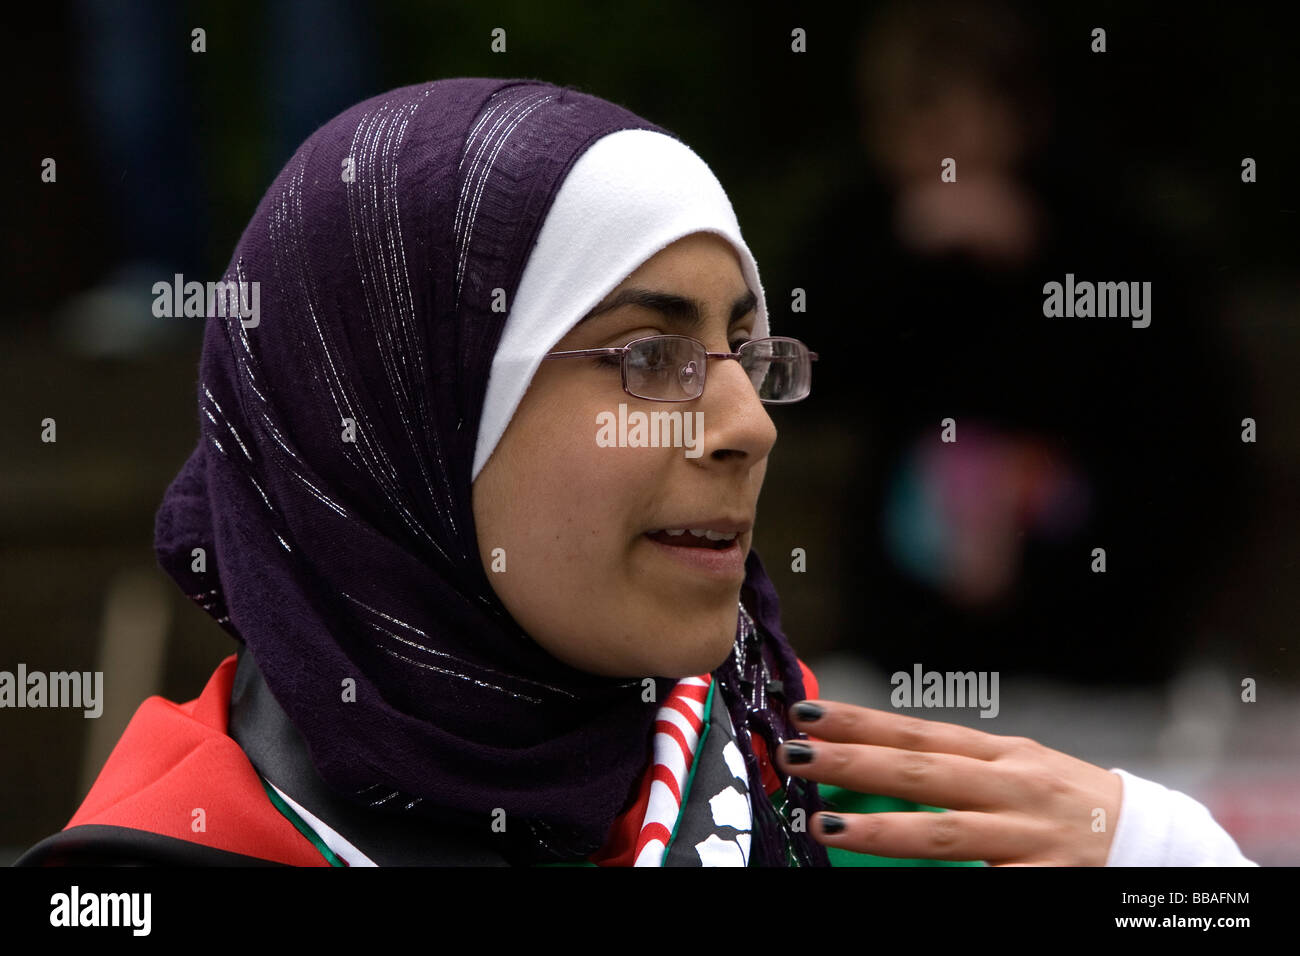 Palestinian protester wearing headscarf Stock Photo